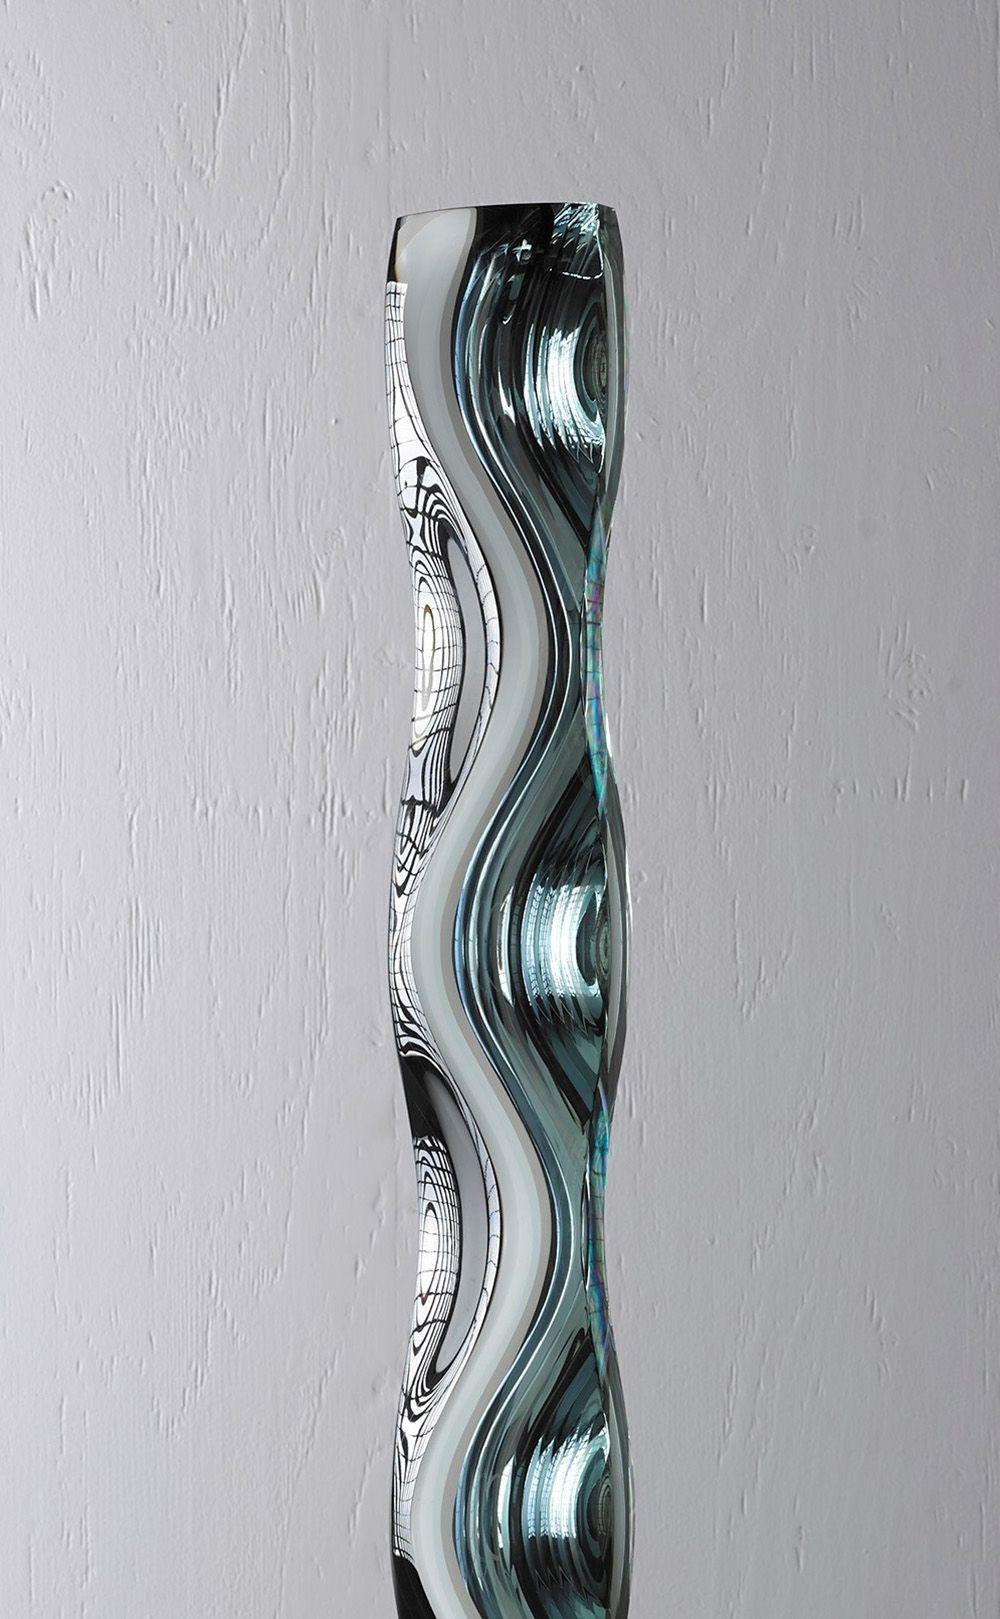 M.190402 by Toshio Iezumi - Contemporary glass sculpture, green, abstract For Sale 4